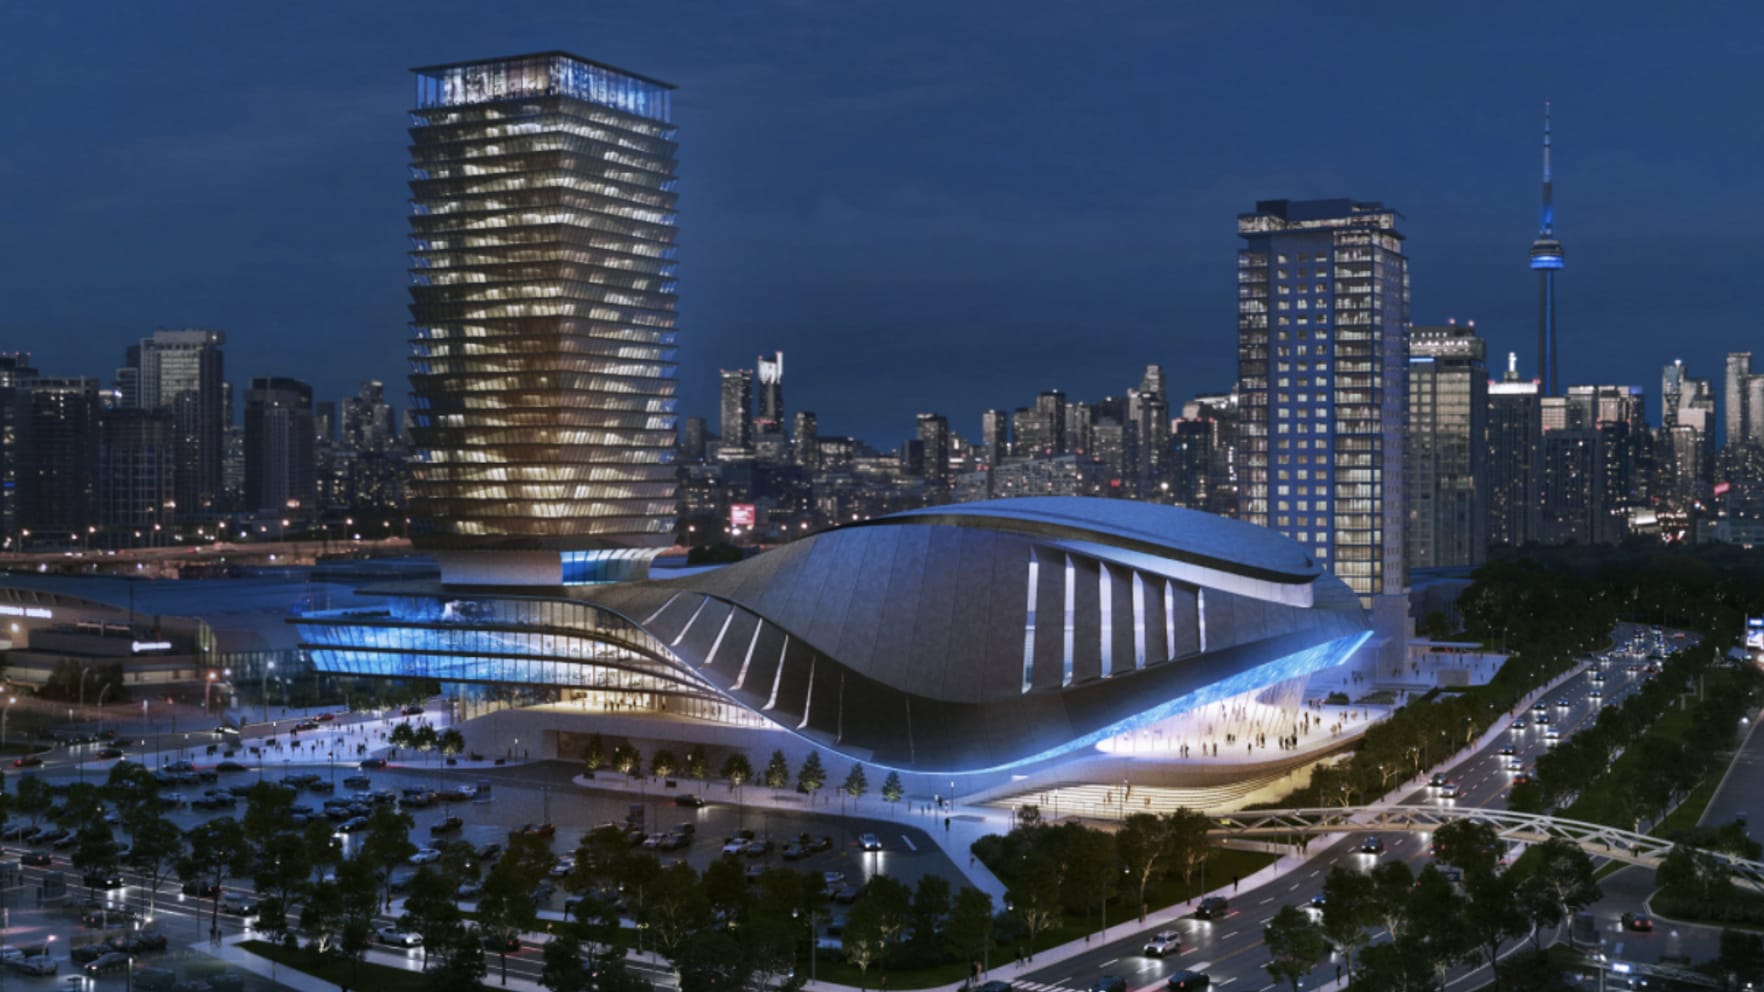 image of expected 7000 seat arena designed by populous